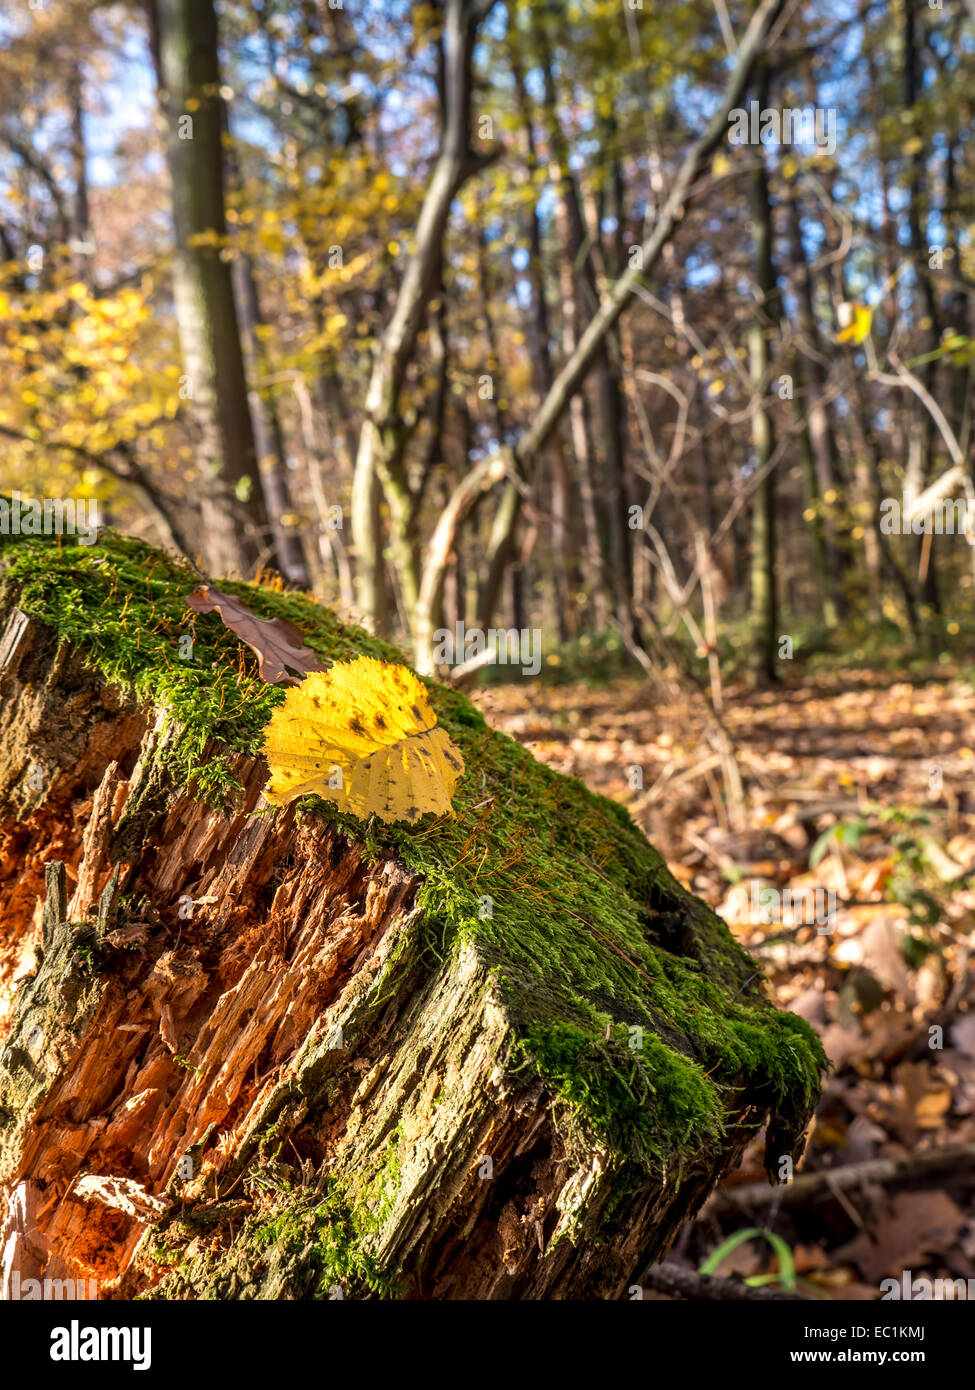 Dead leaf lying on moss-grown tree stump in the forest Stock Photo